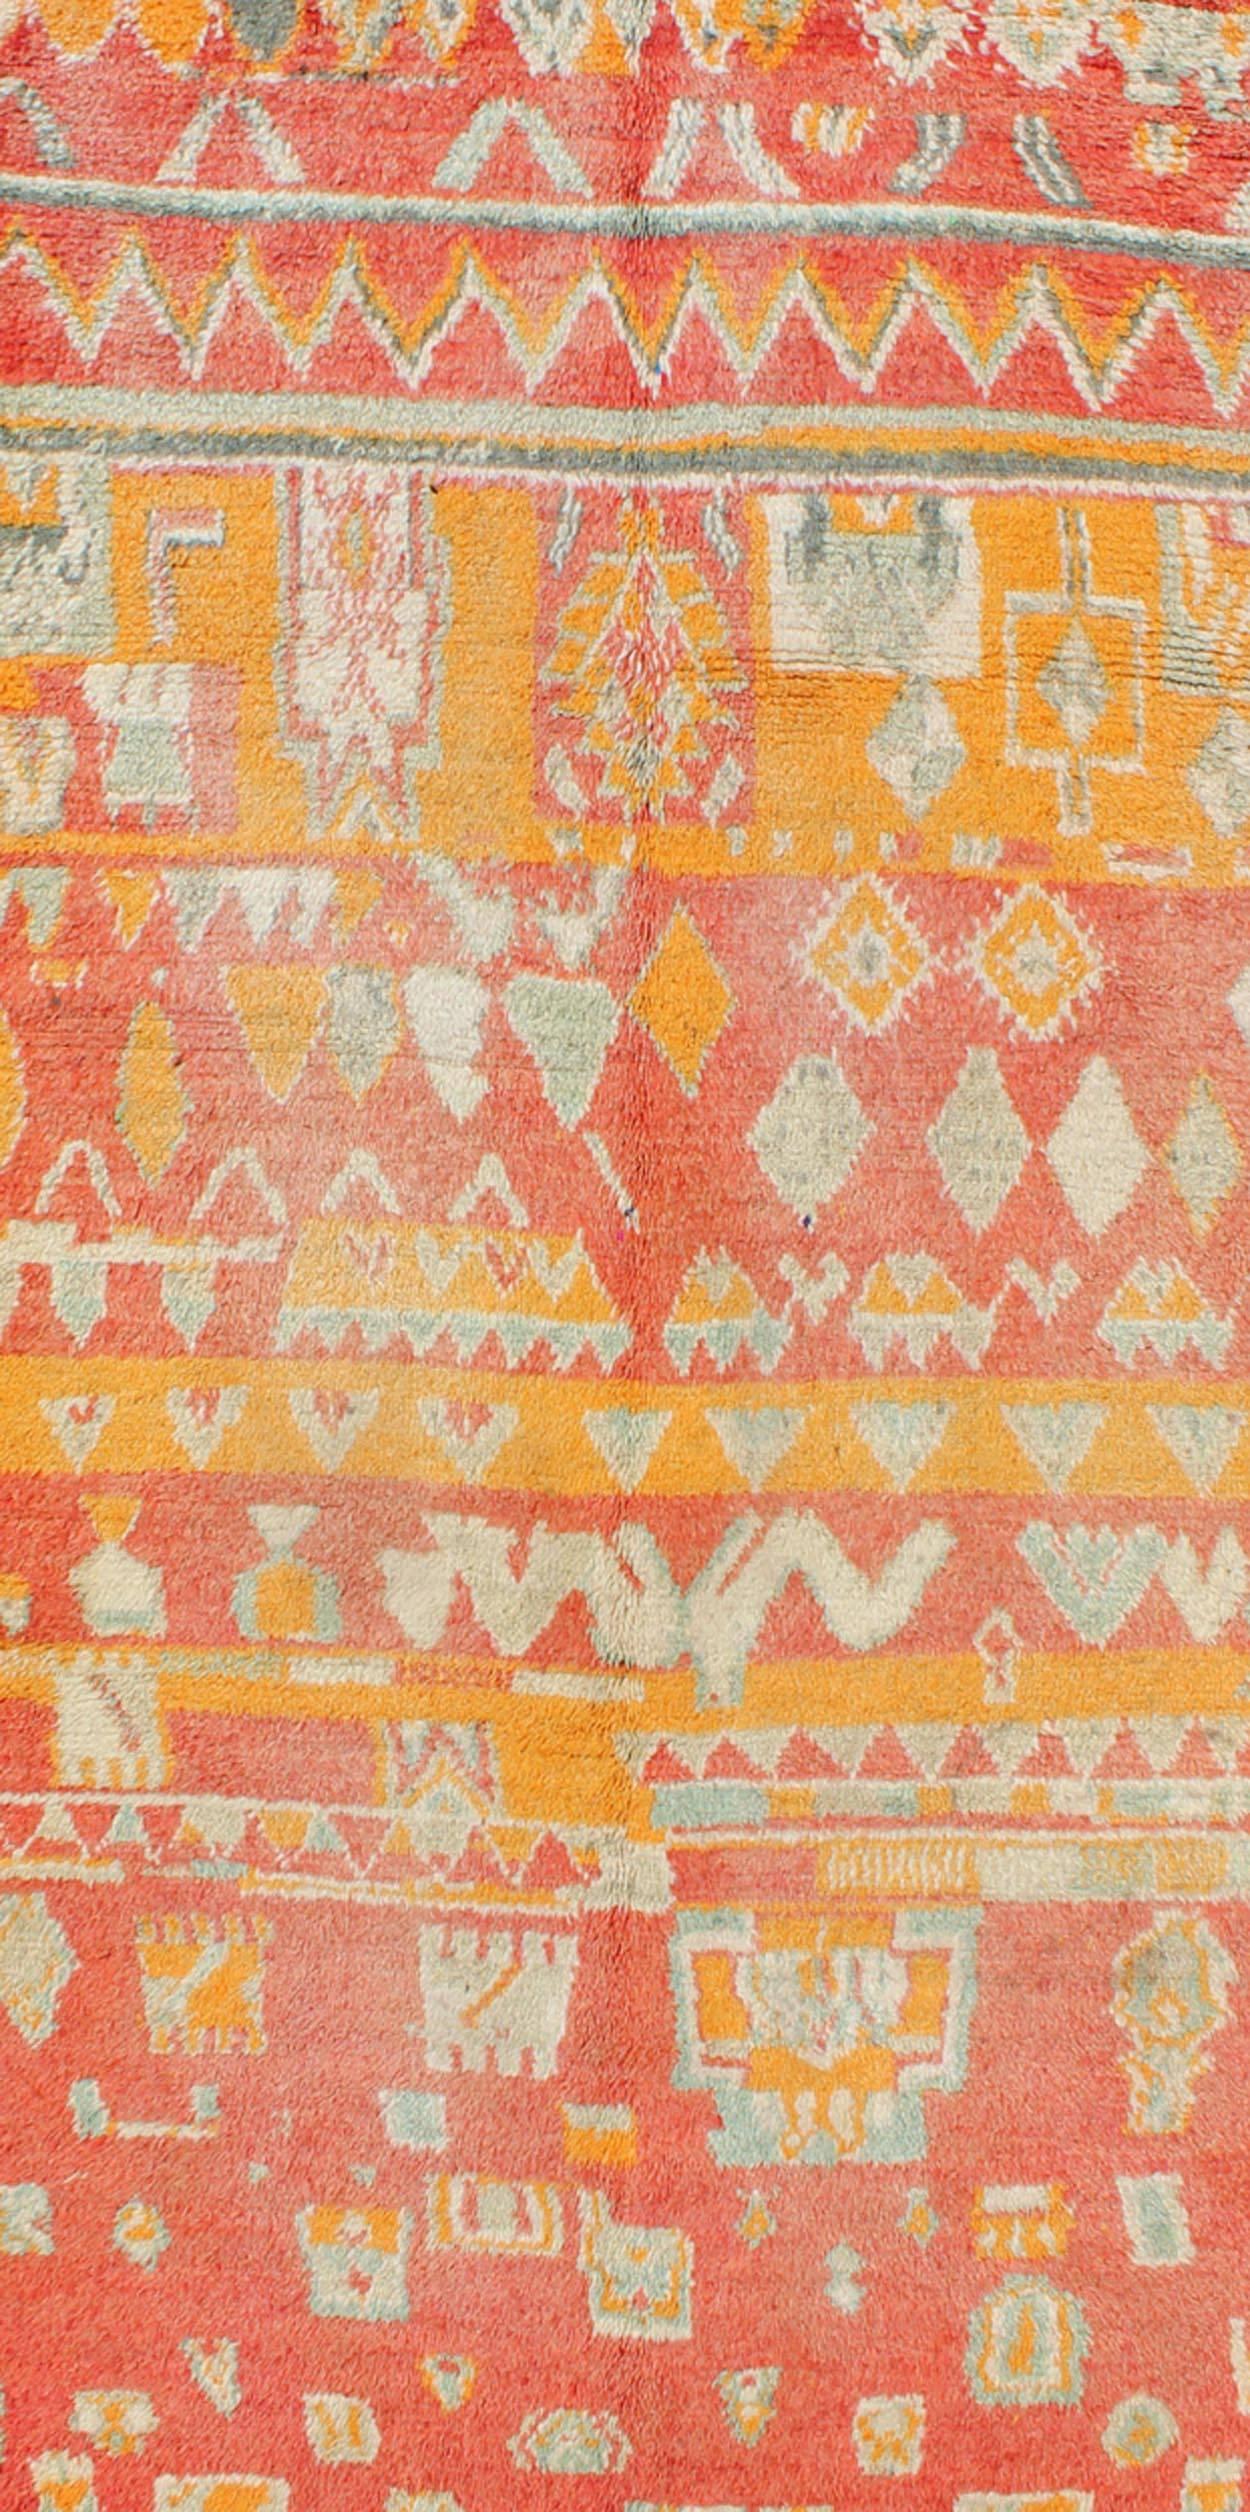 Hand-Knotted Tribal Design Vintage Moroccan Rug in Orange, Red, Mint Green and Ivory For Sale